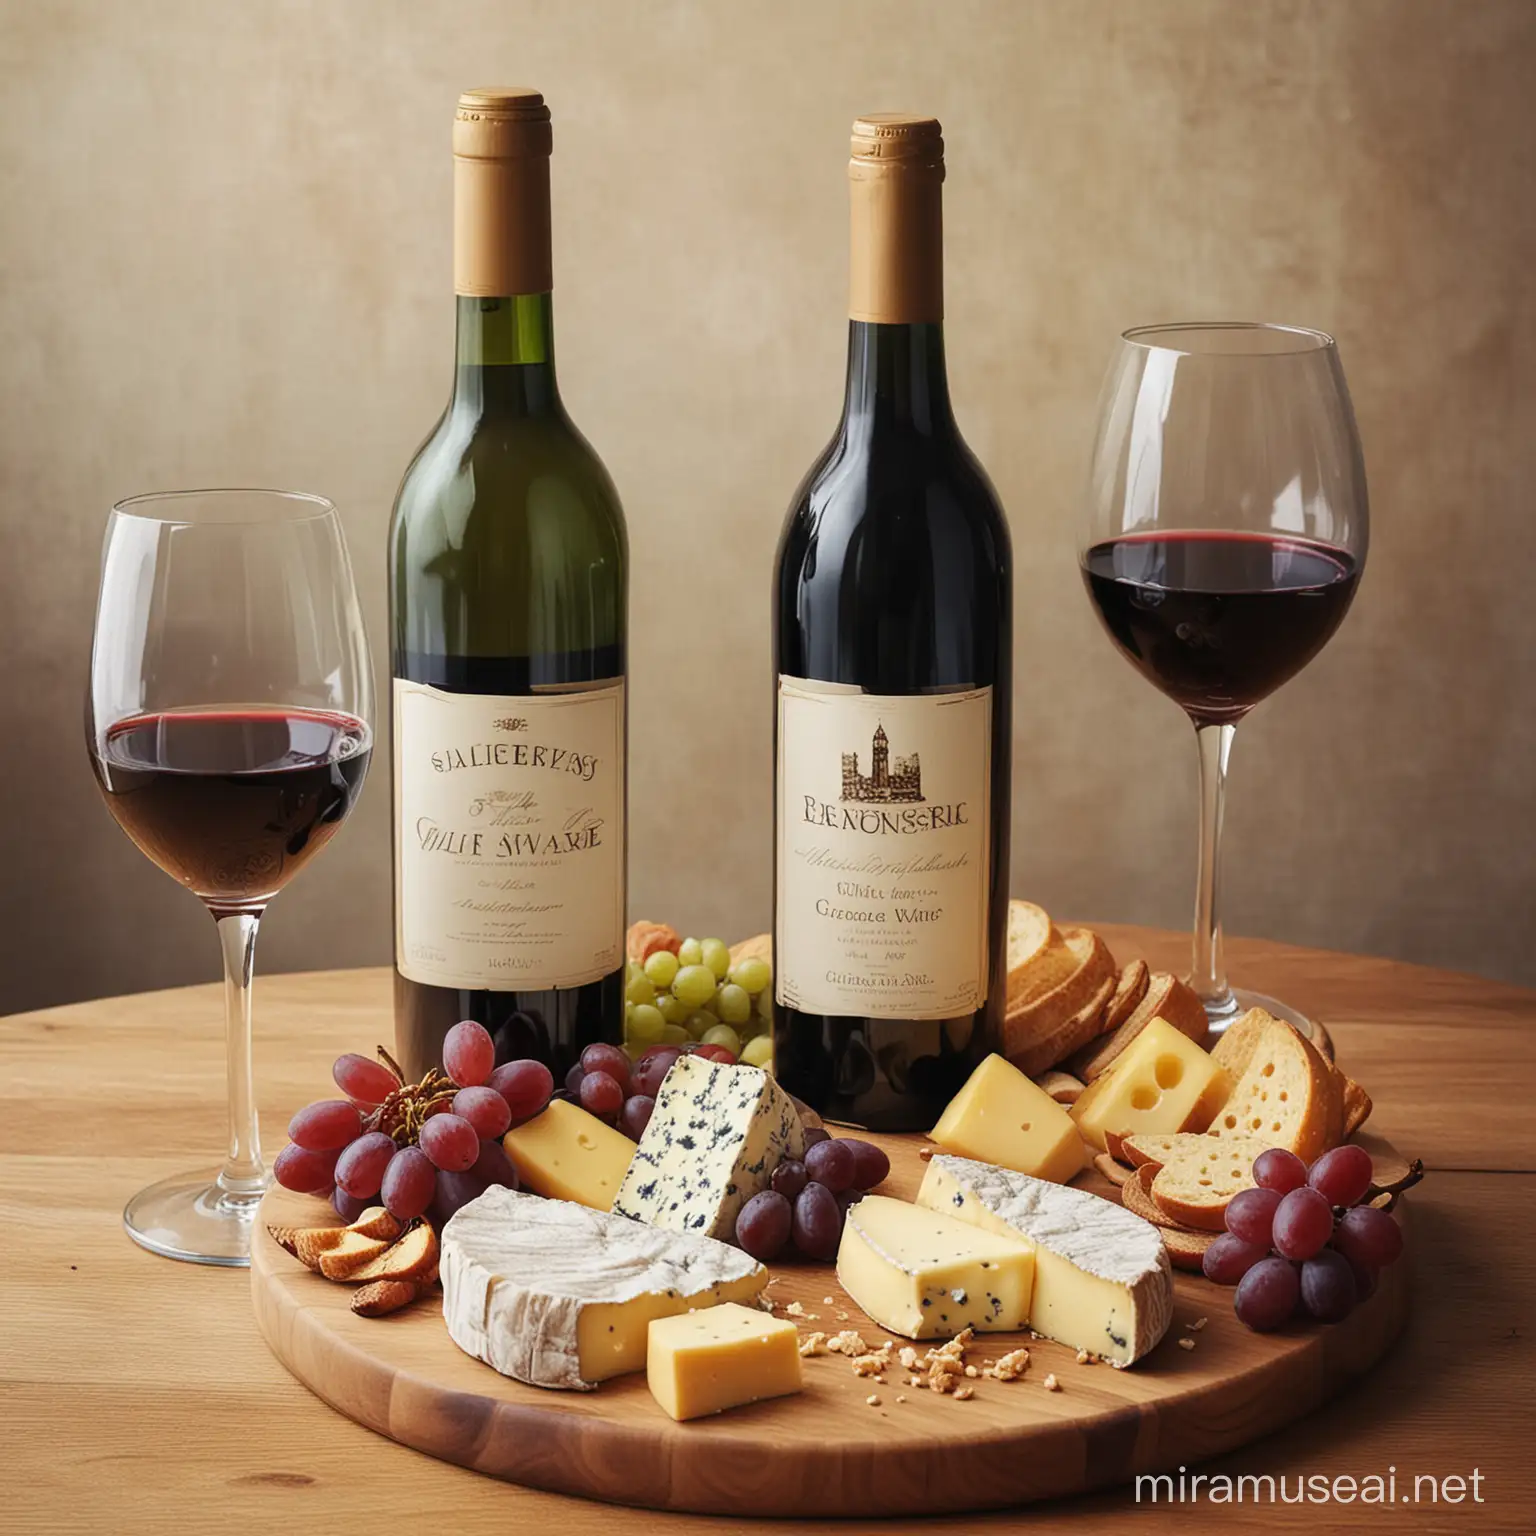 A cheese platter, a bottle of wine and two glasses, nothing else